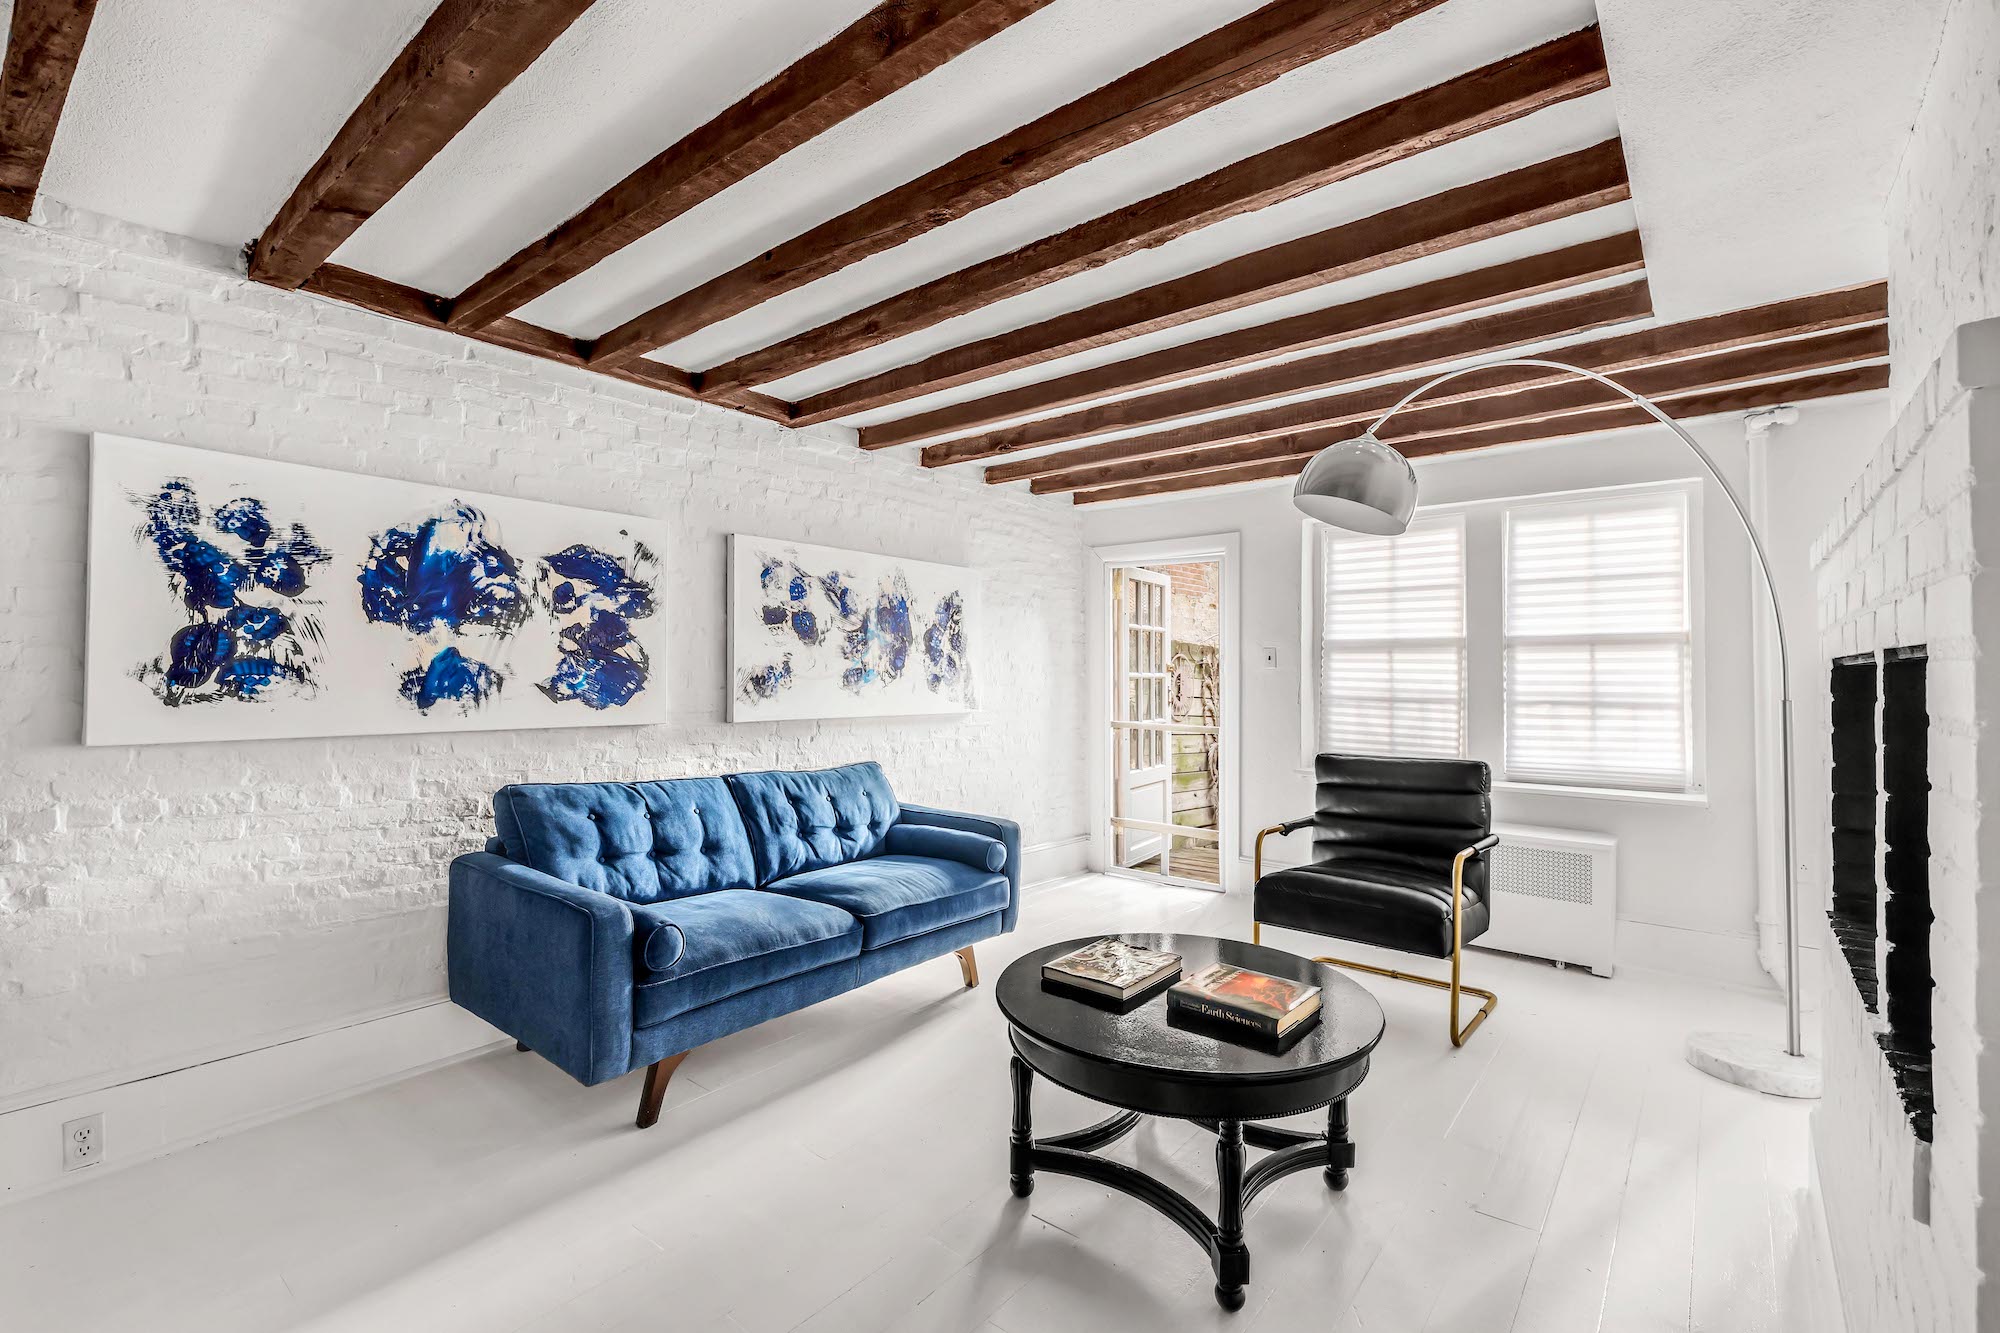 Skinny Upper East Side townhouse with literary ties asks $4M | 6sqft